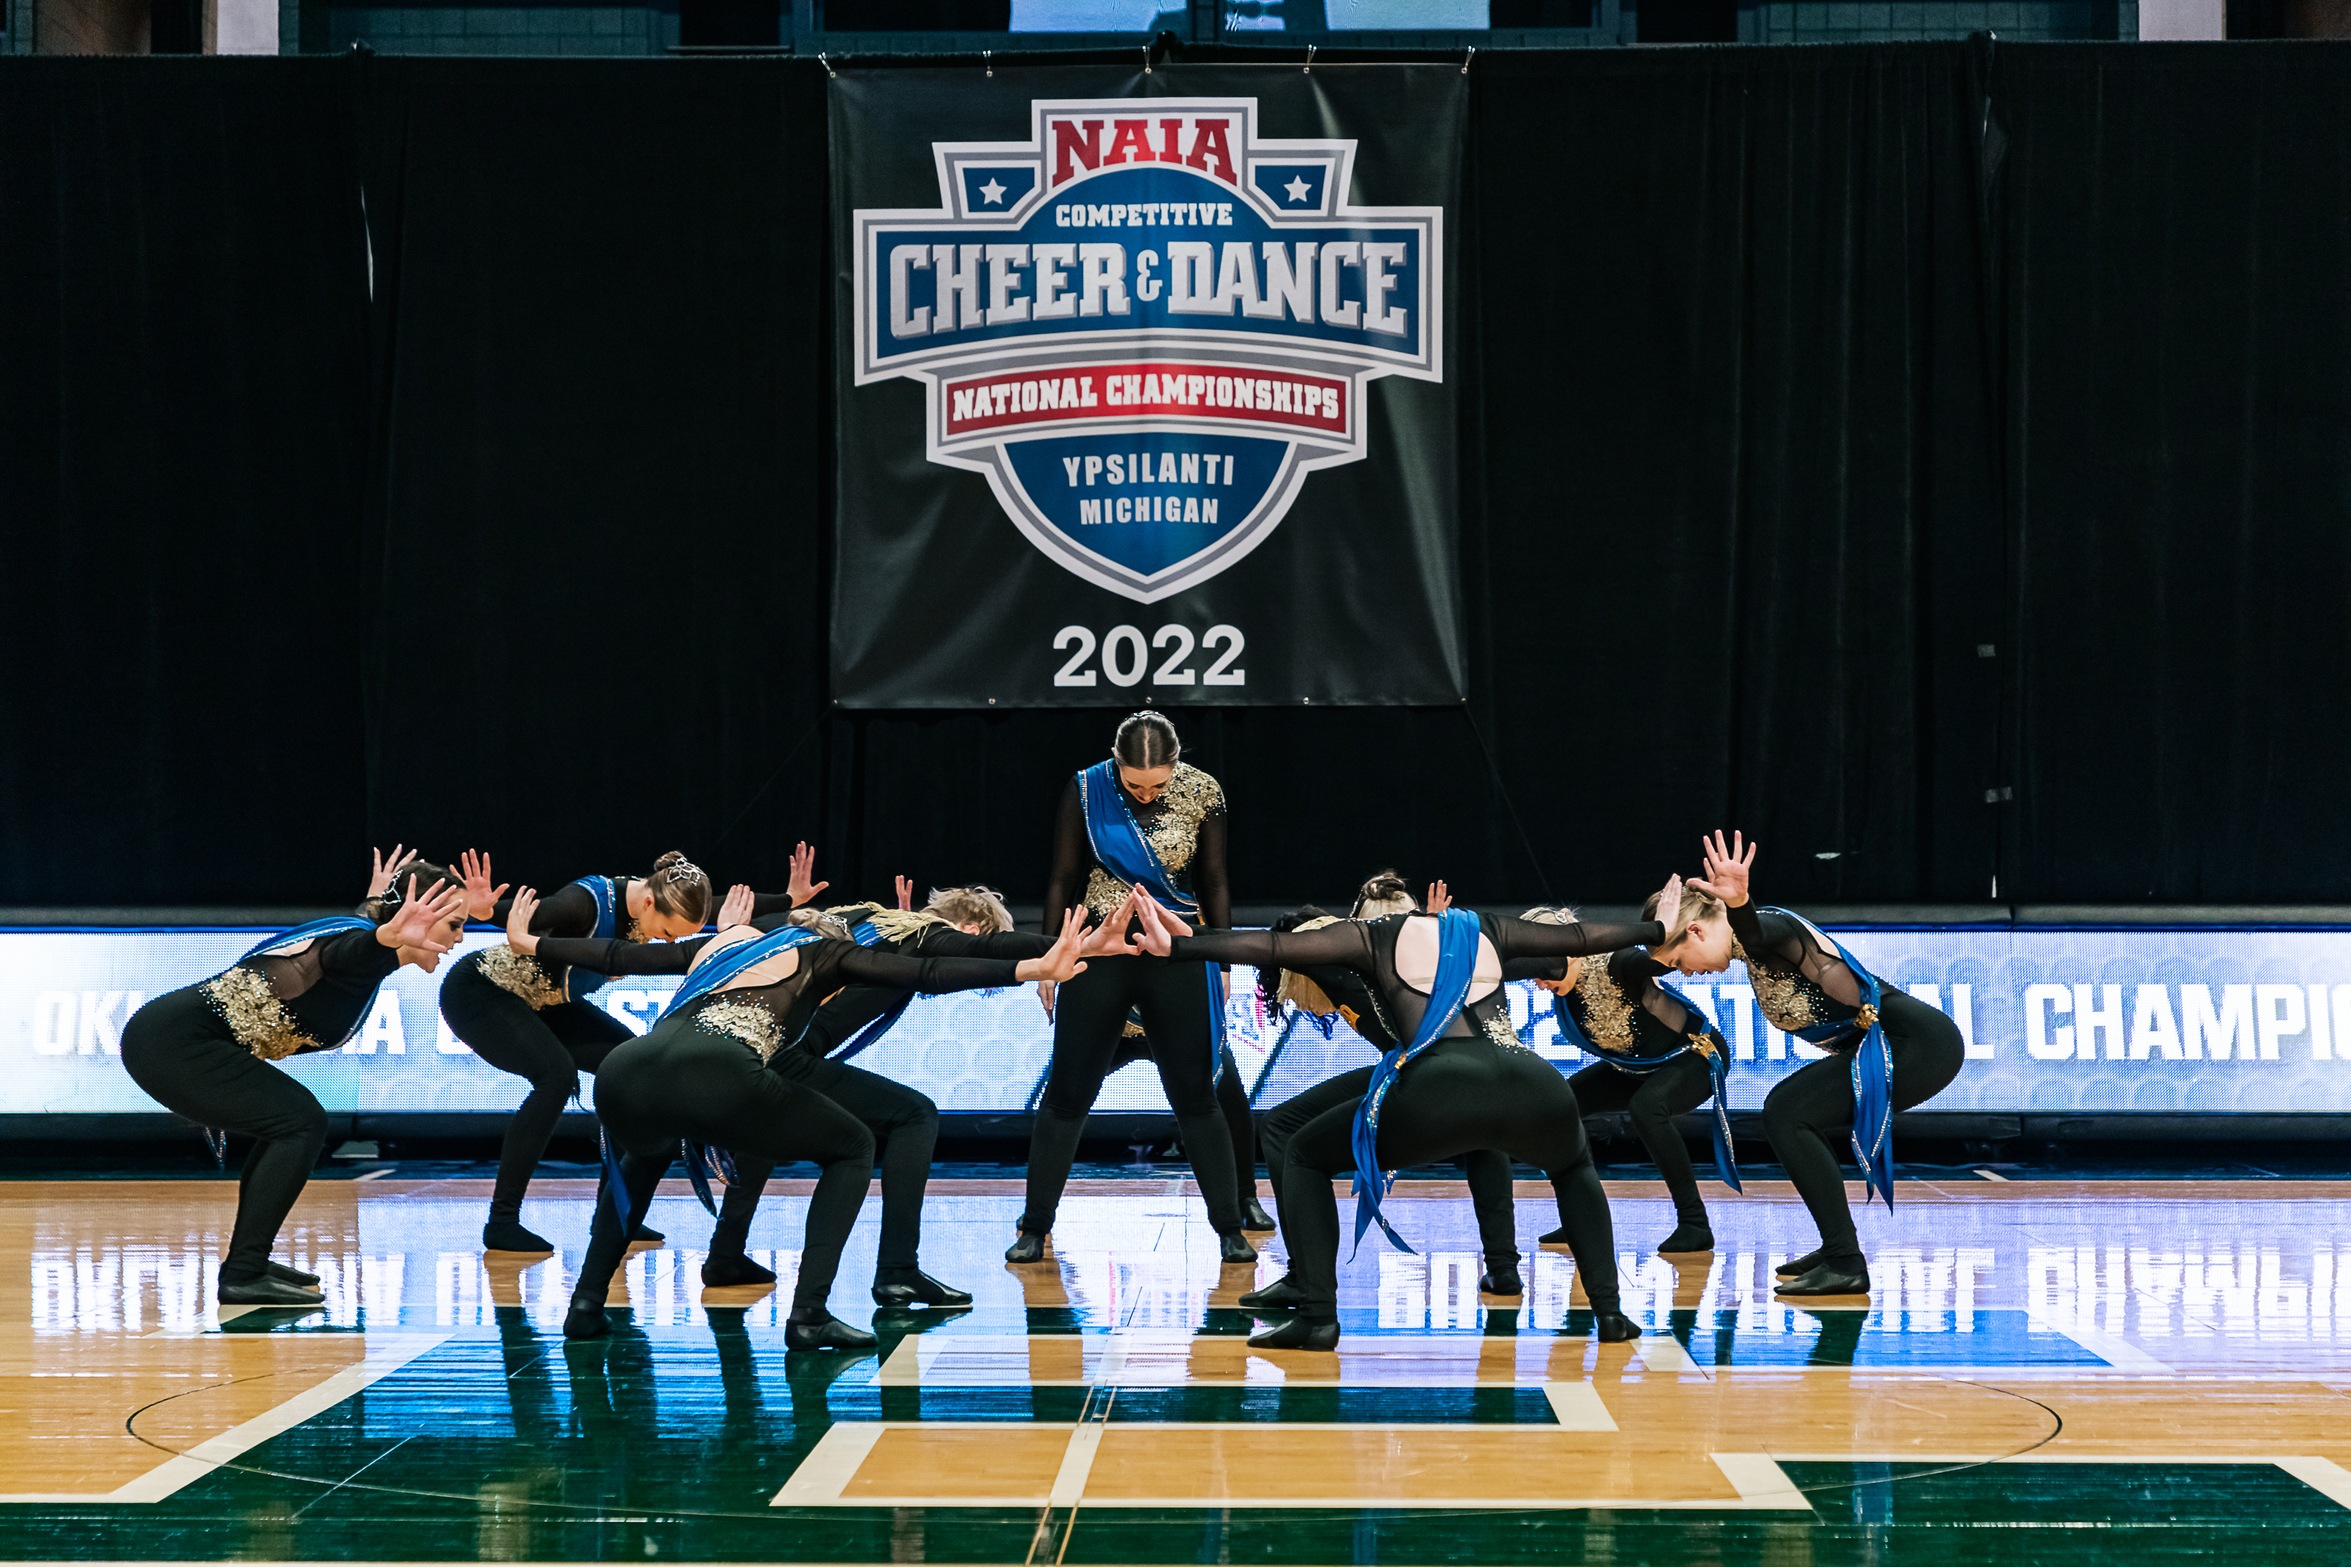 2022 NAIA Competitive Dance National Championship Recap - Day One